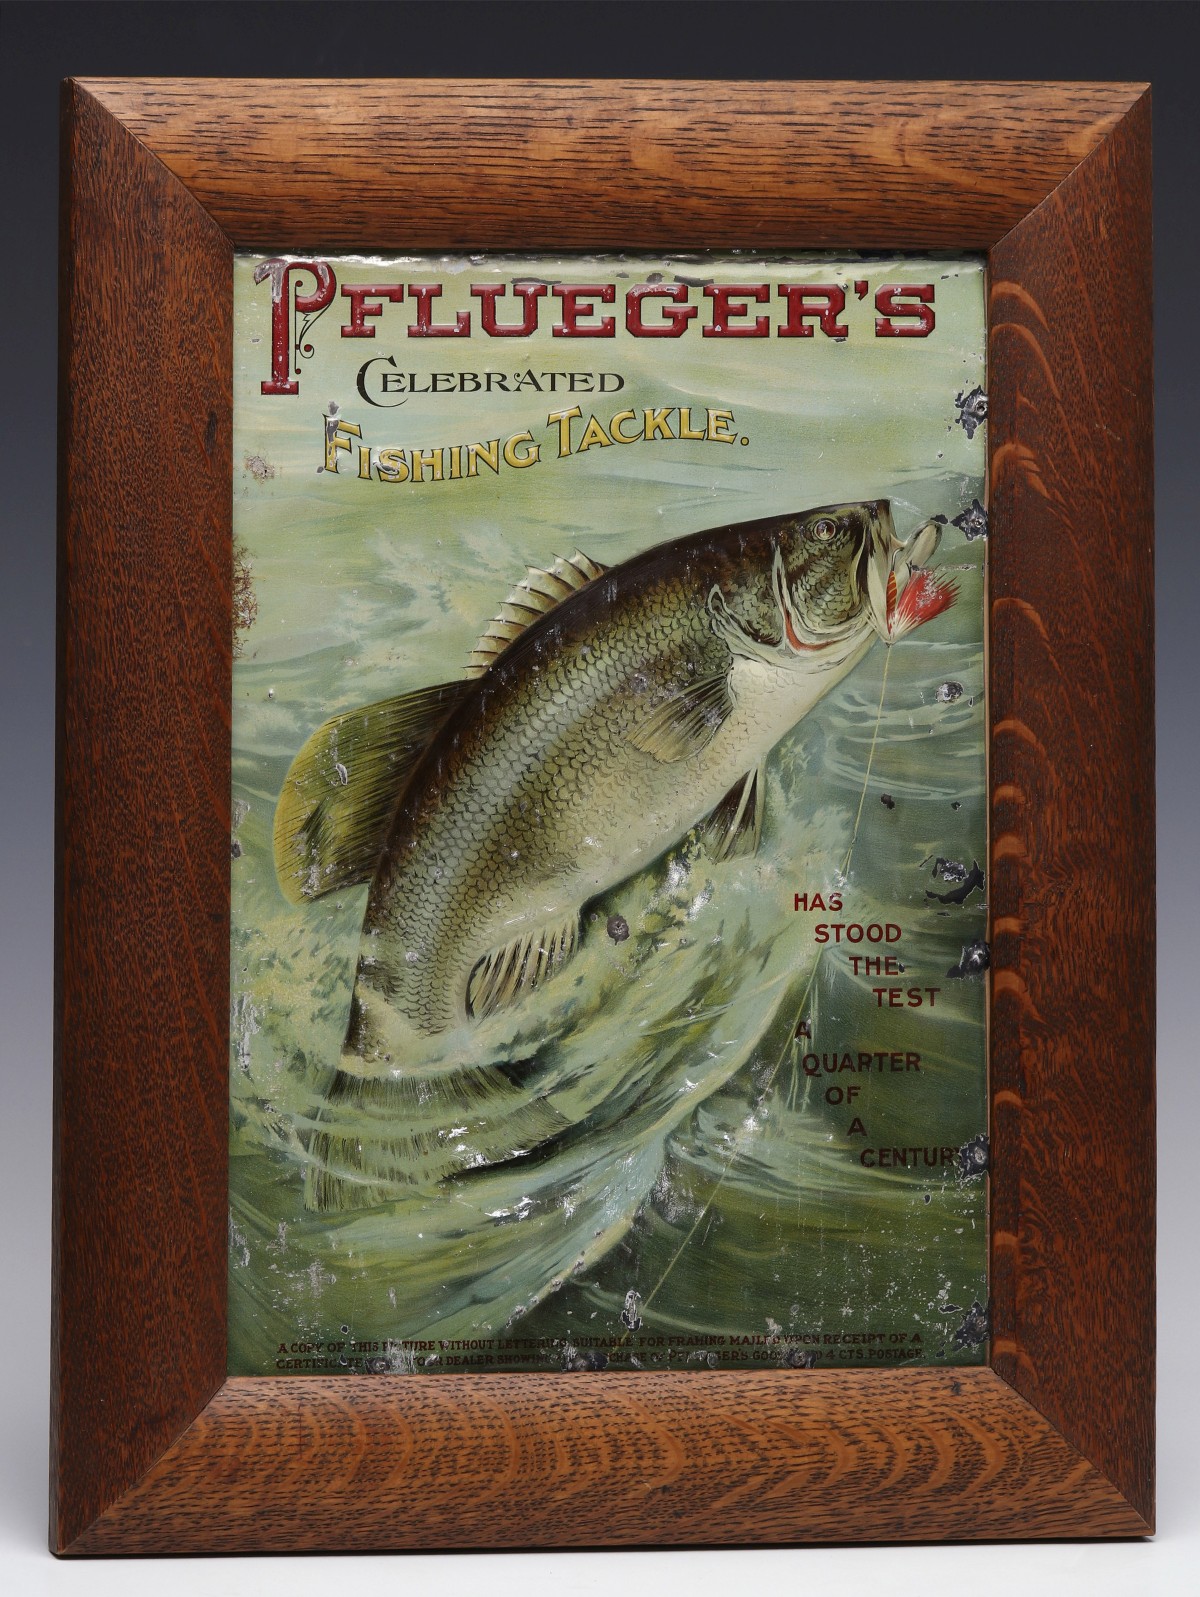 A PFLUEGER'S FISHING TACKLE TIN LITHO ADVERTISING SIGN